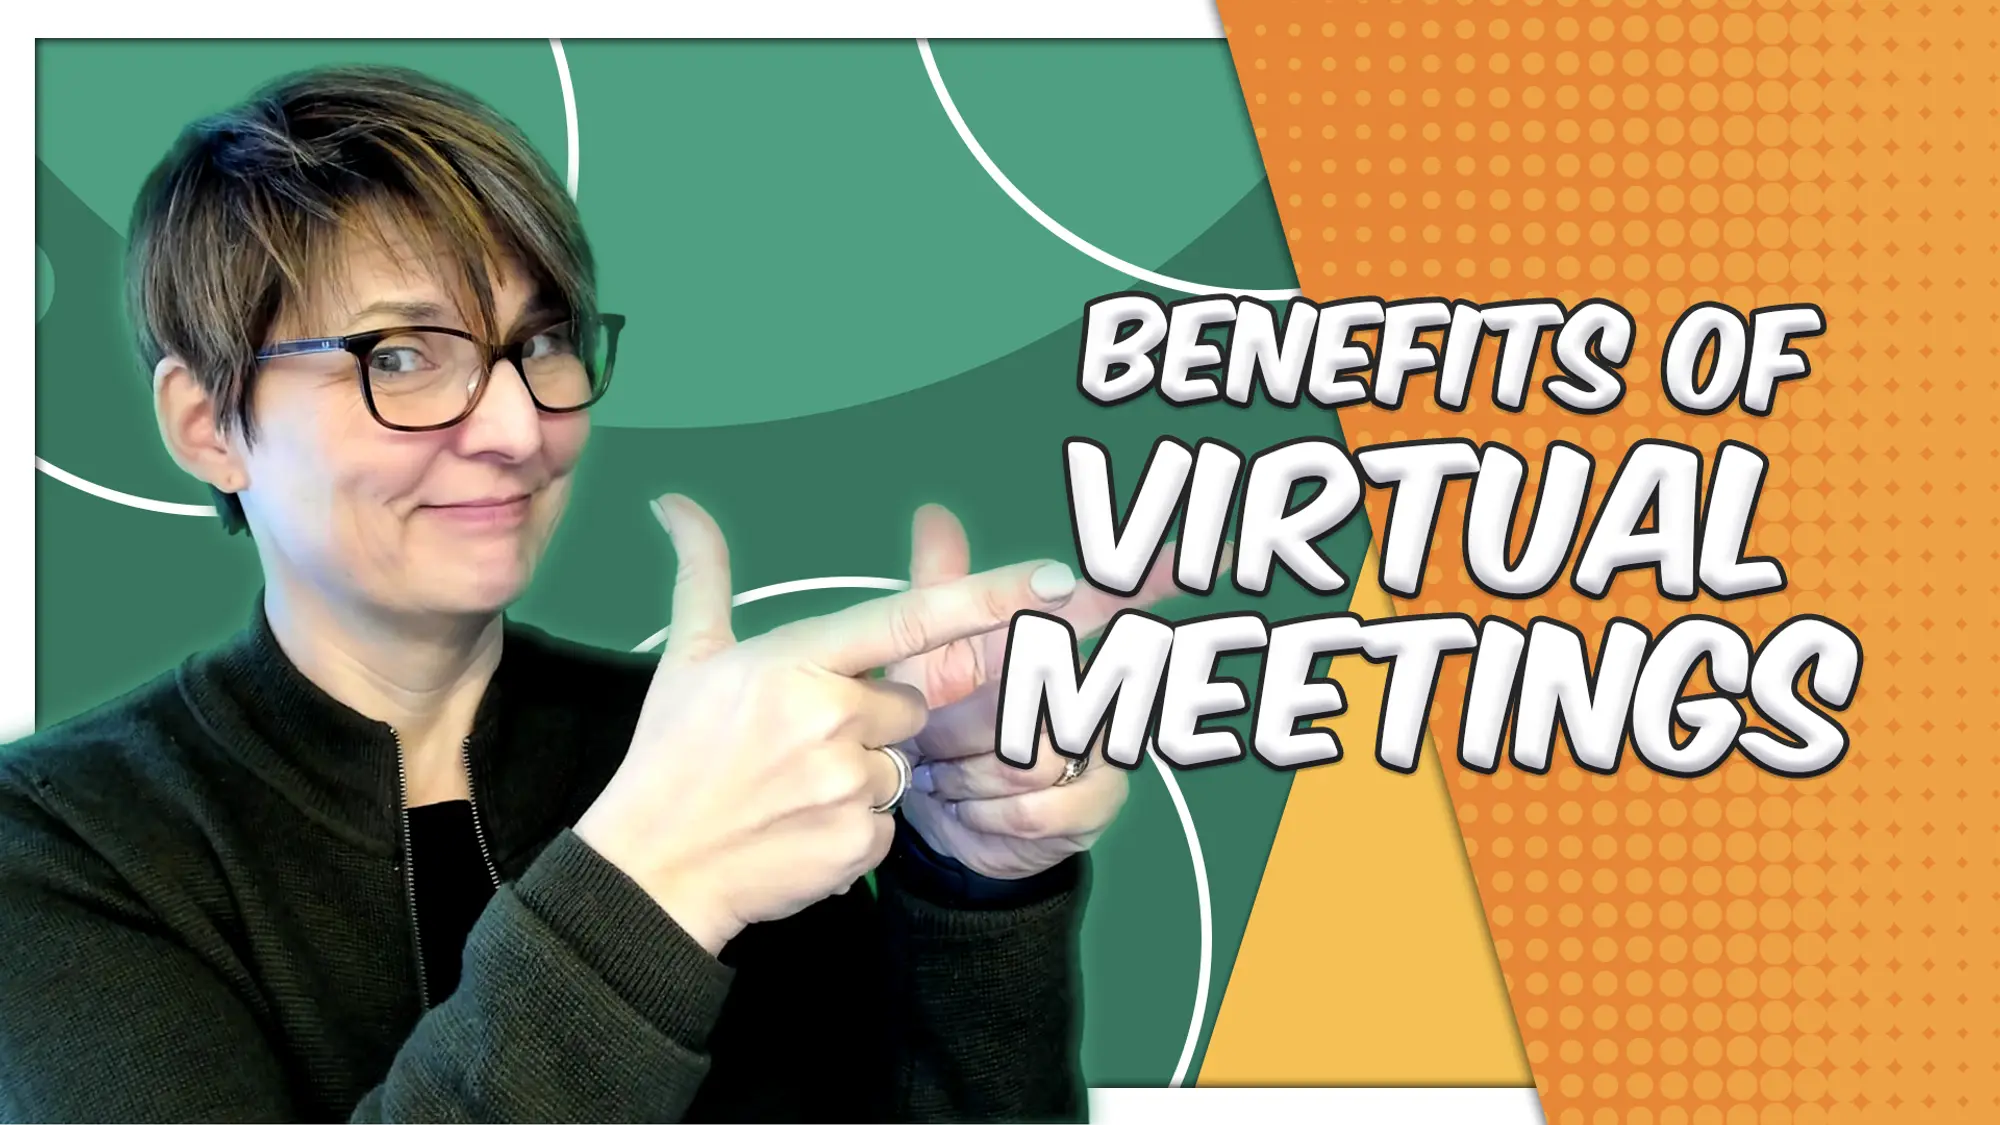 Benefits of Virtual Meetings with Liane Davey